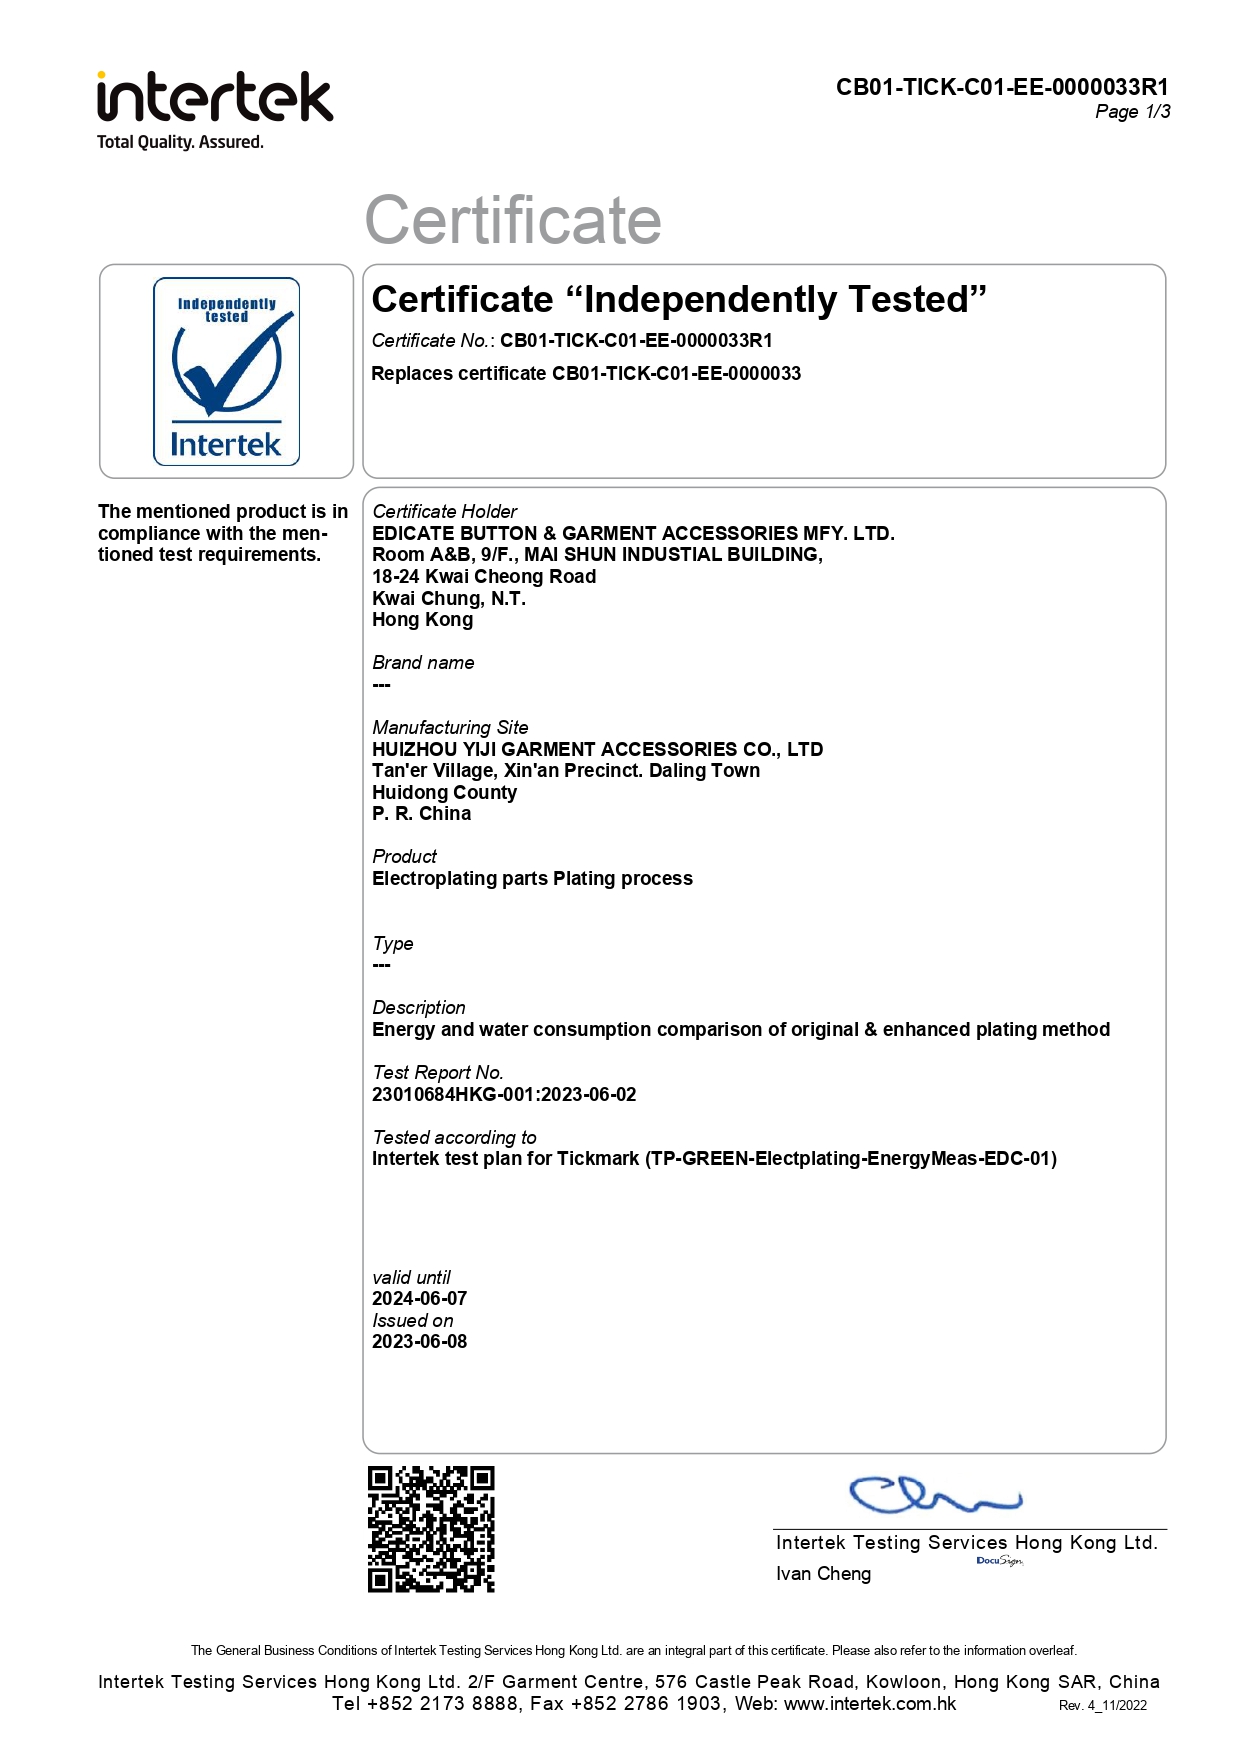 Tapestry verified raw material suppliers In-house laboratory accreditation  certificate for COACH / KATE SPADE / STUART WEITZMAN - EDICATE